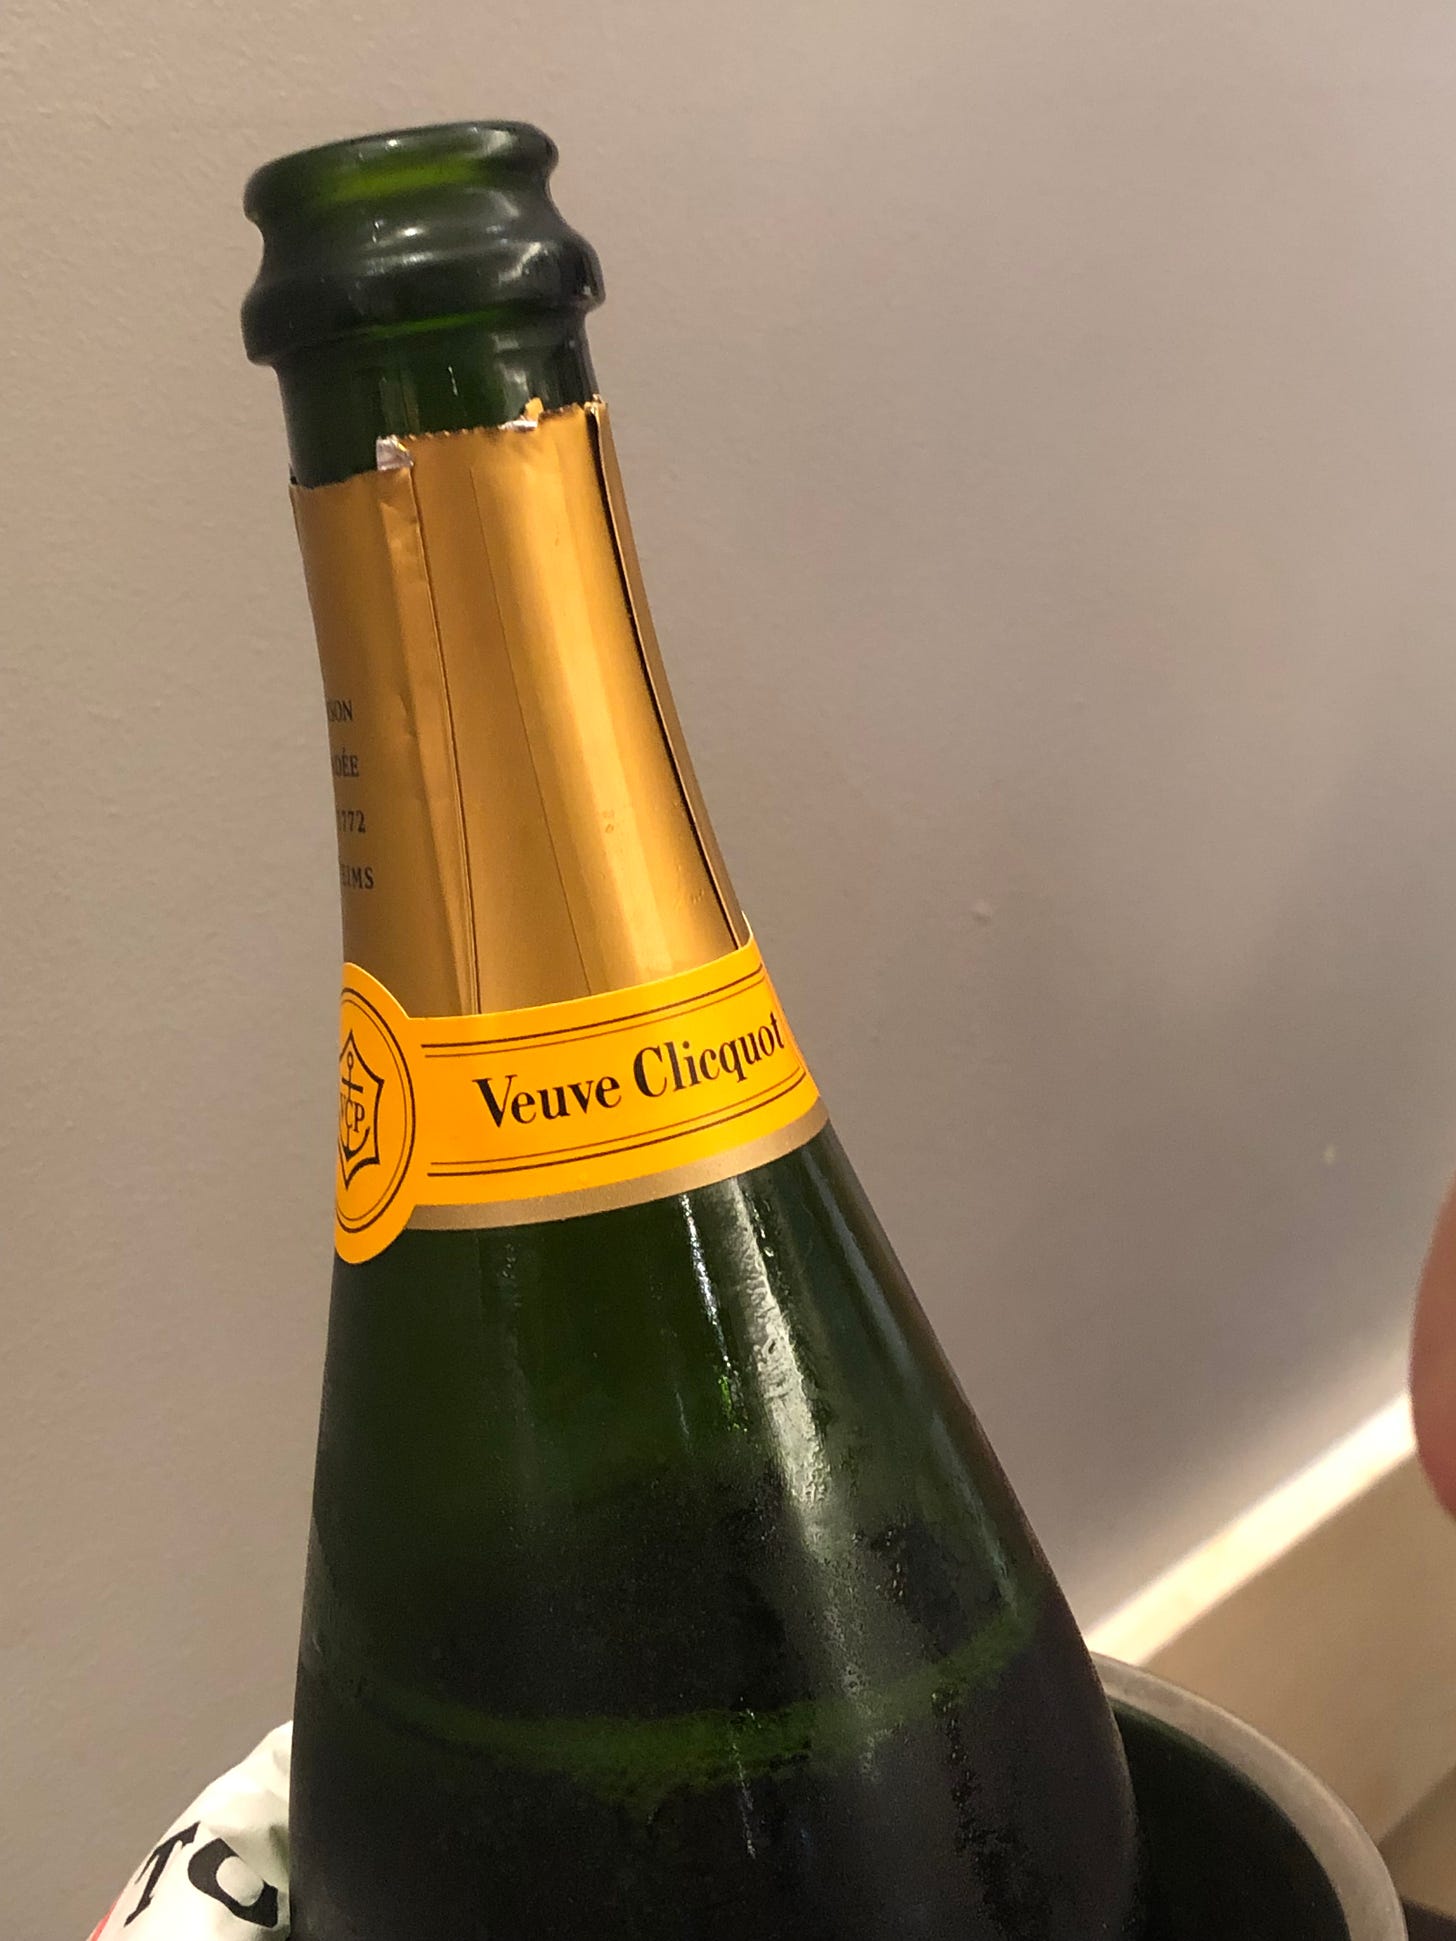 A bottle of Veuve Clicquot on ice